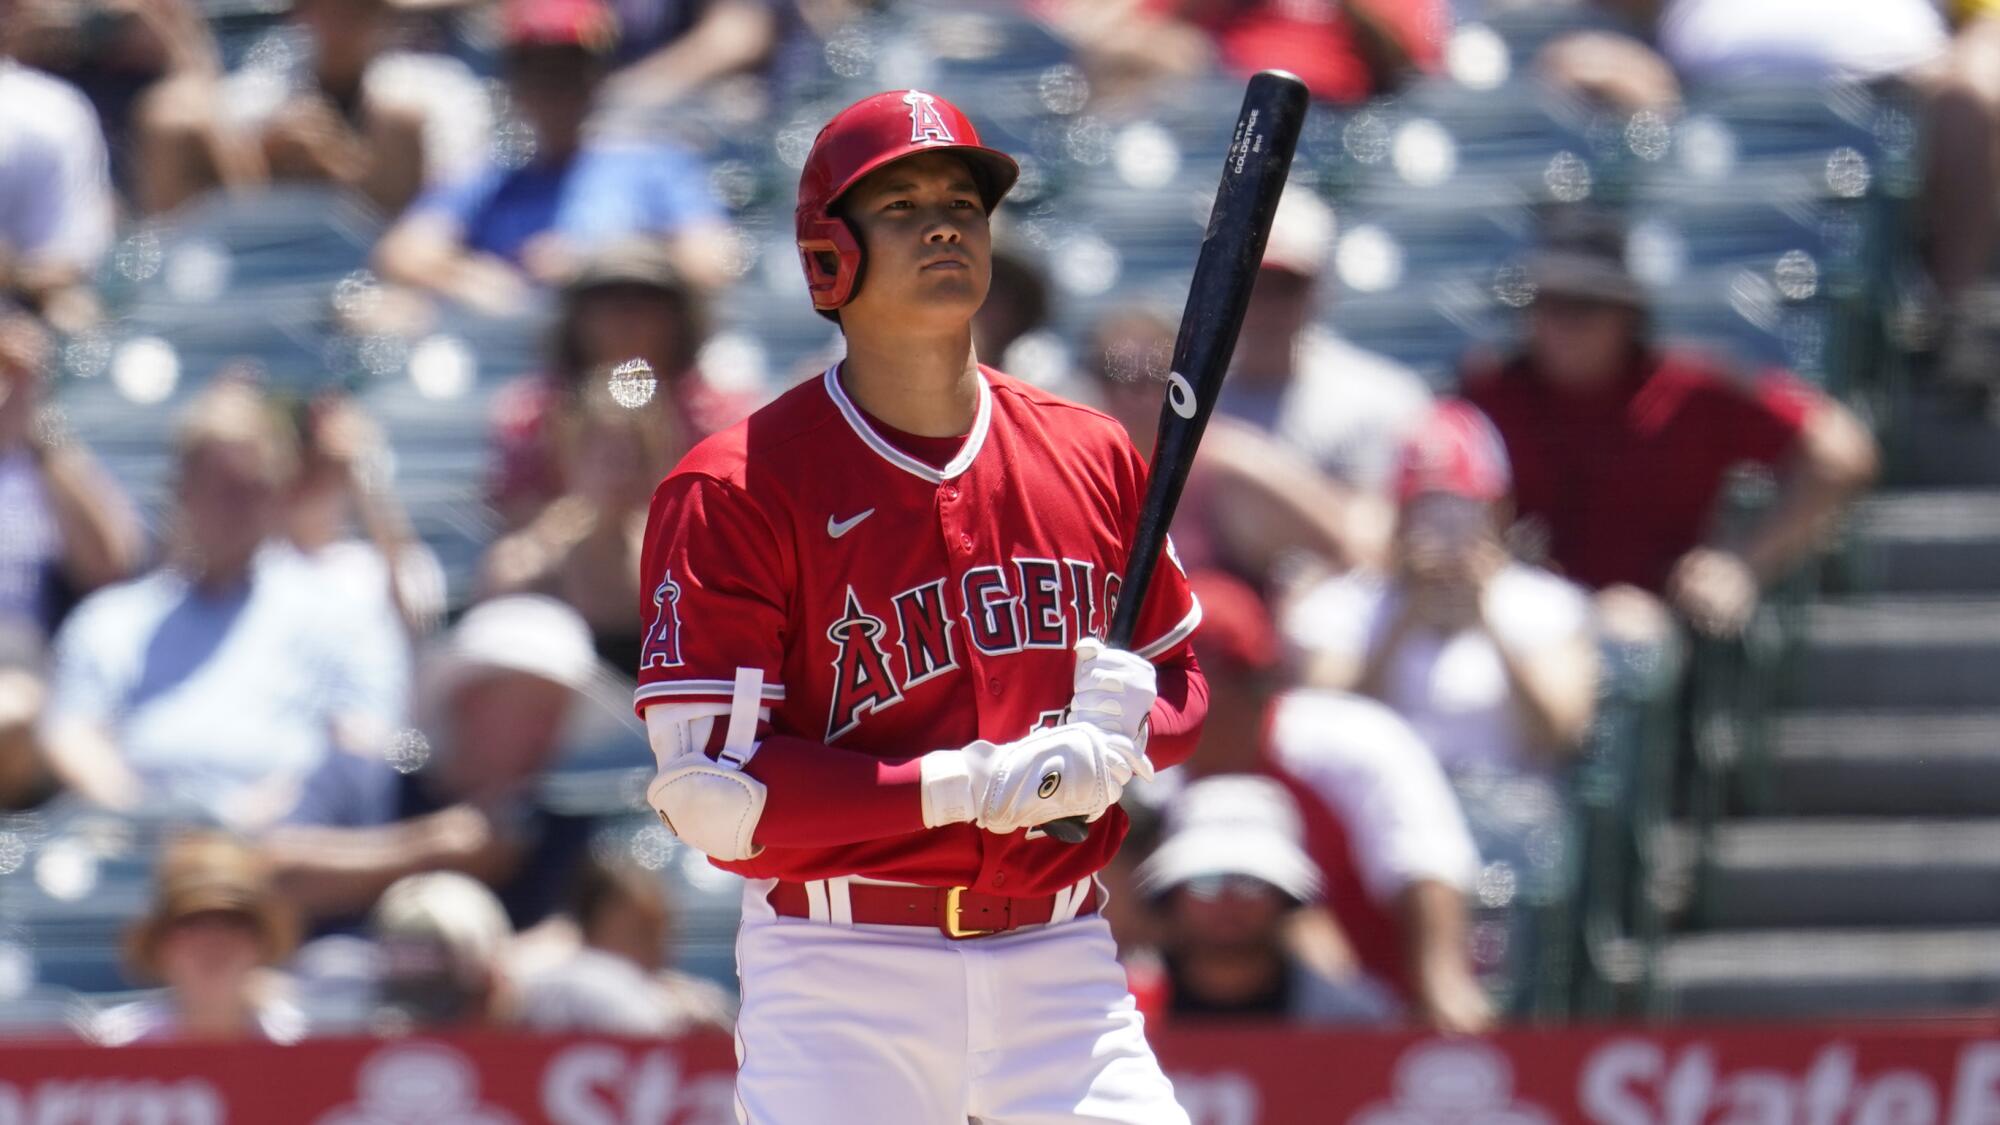 Shohei Ohtani of the Angels prepares to bat against the Minnesota Twins on Aug. 14, 2022.